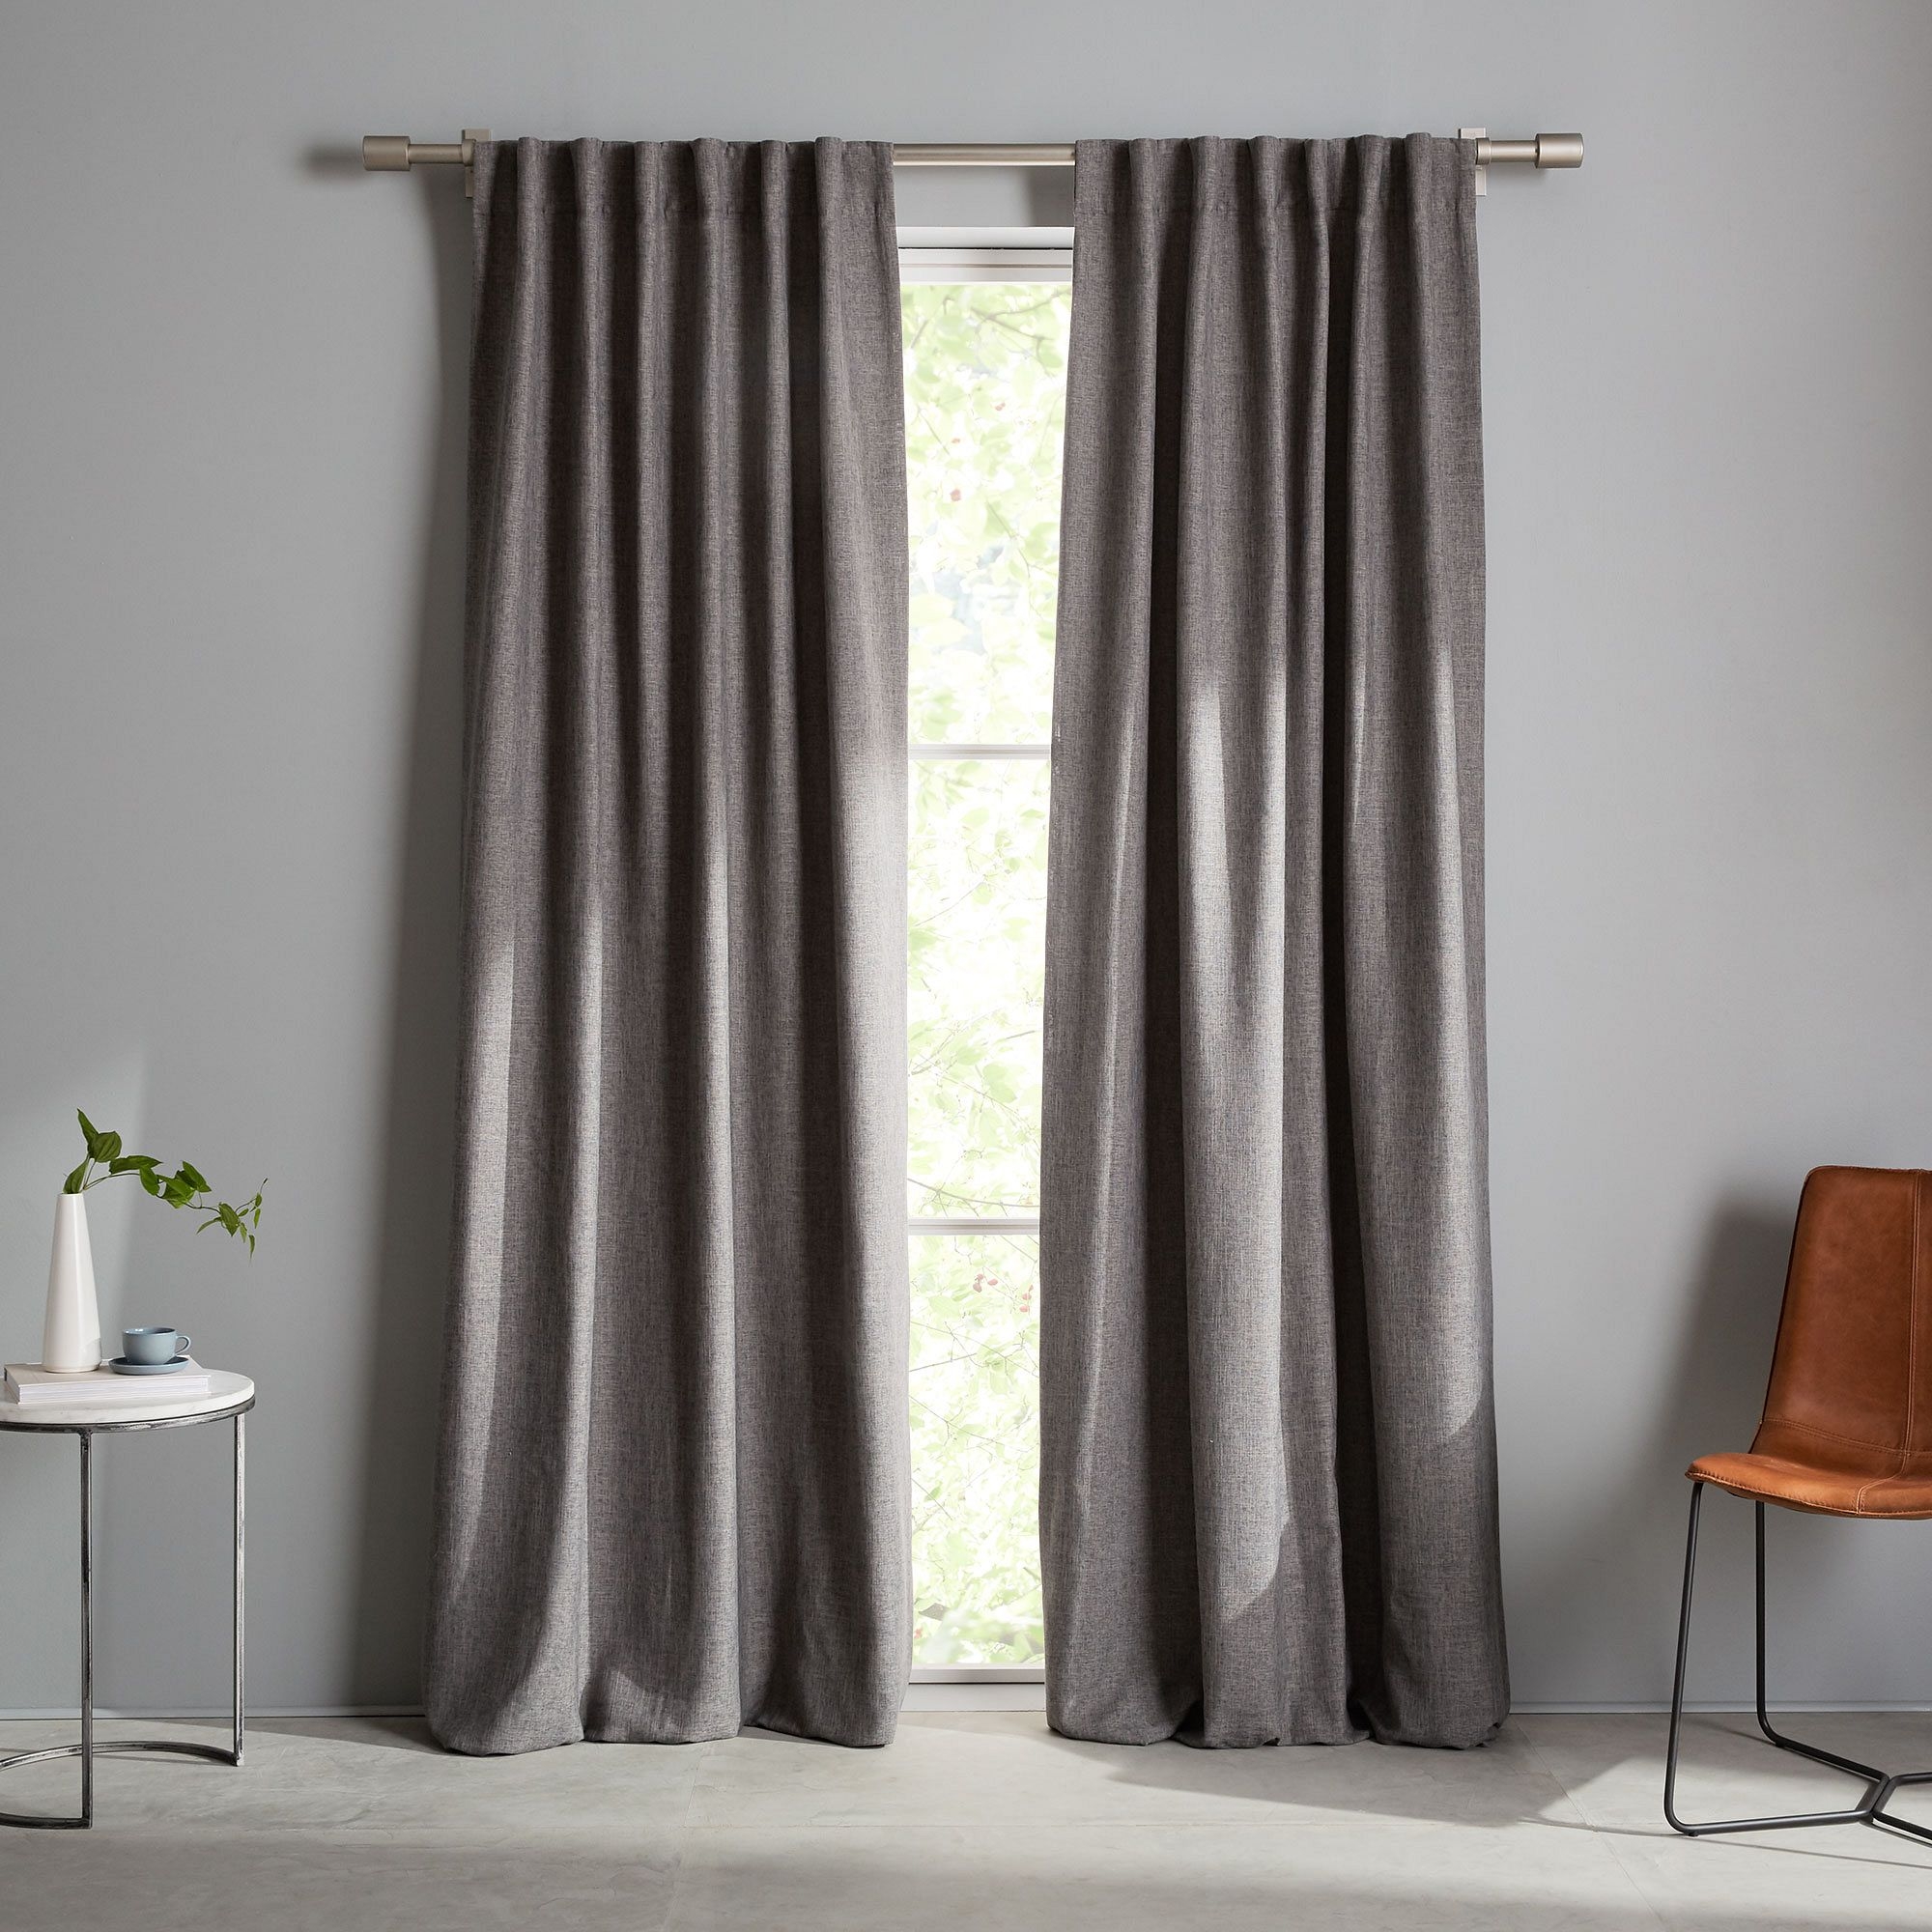 Crossweave Curtain with Blackout Lining, Charcoal, 48"x96", Set of 2 - Image 0